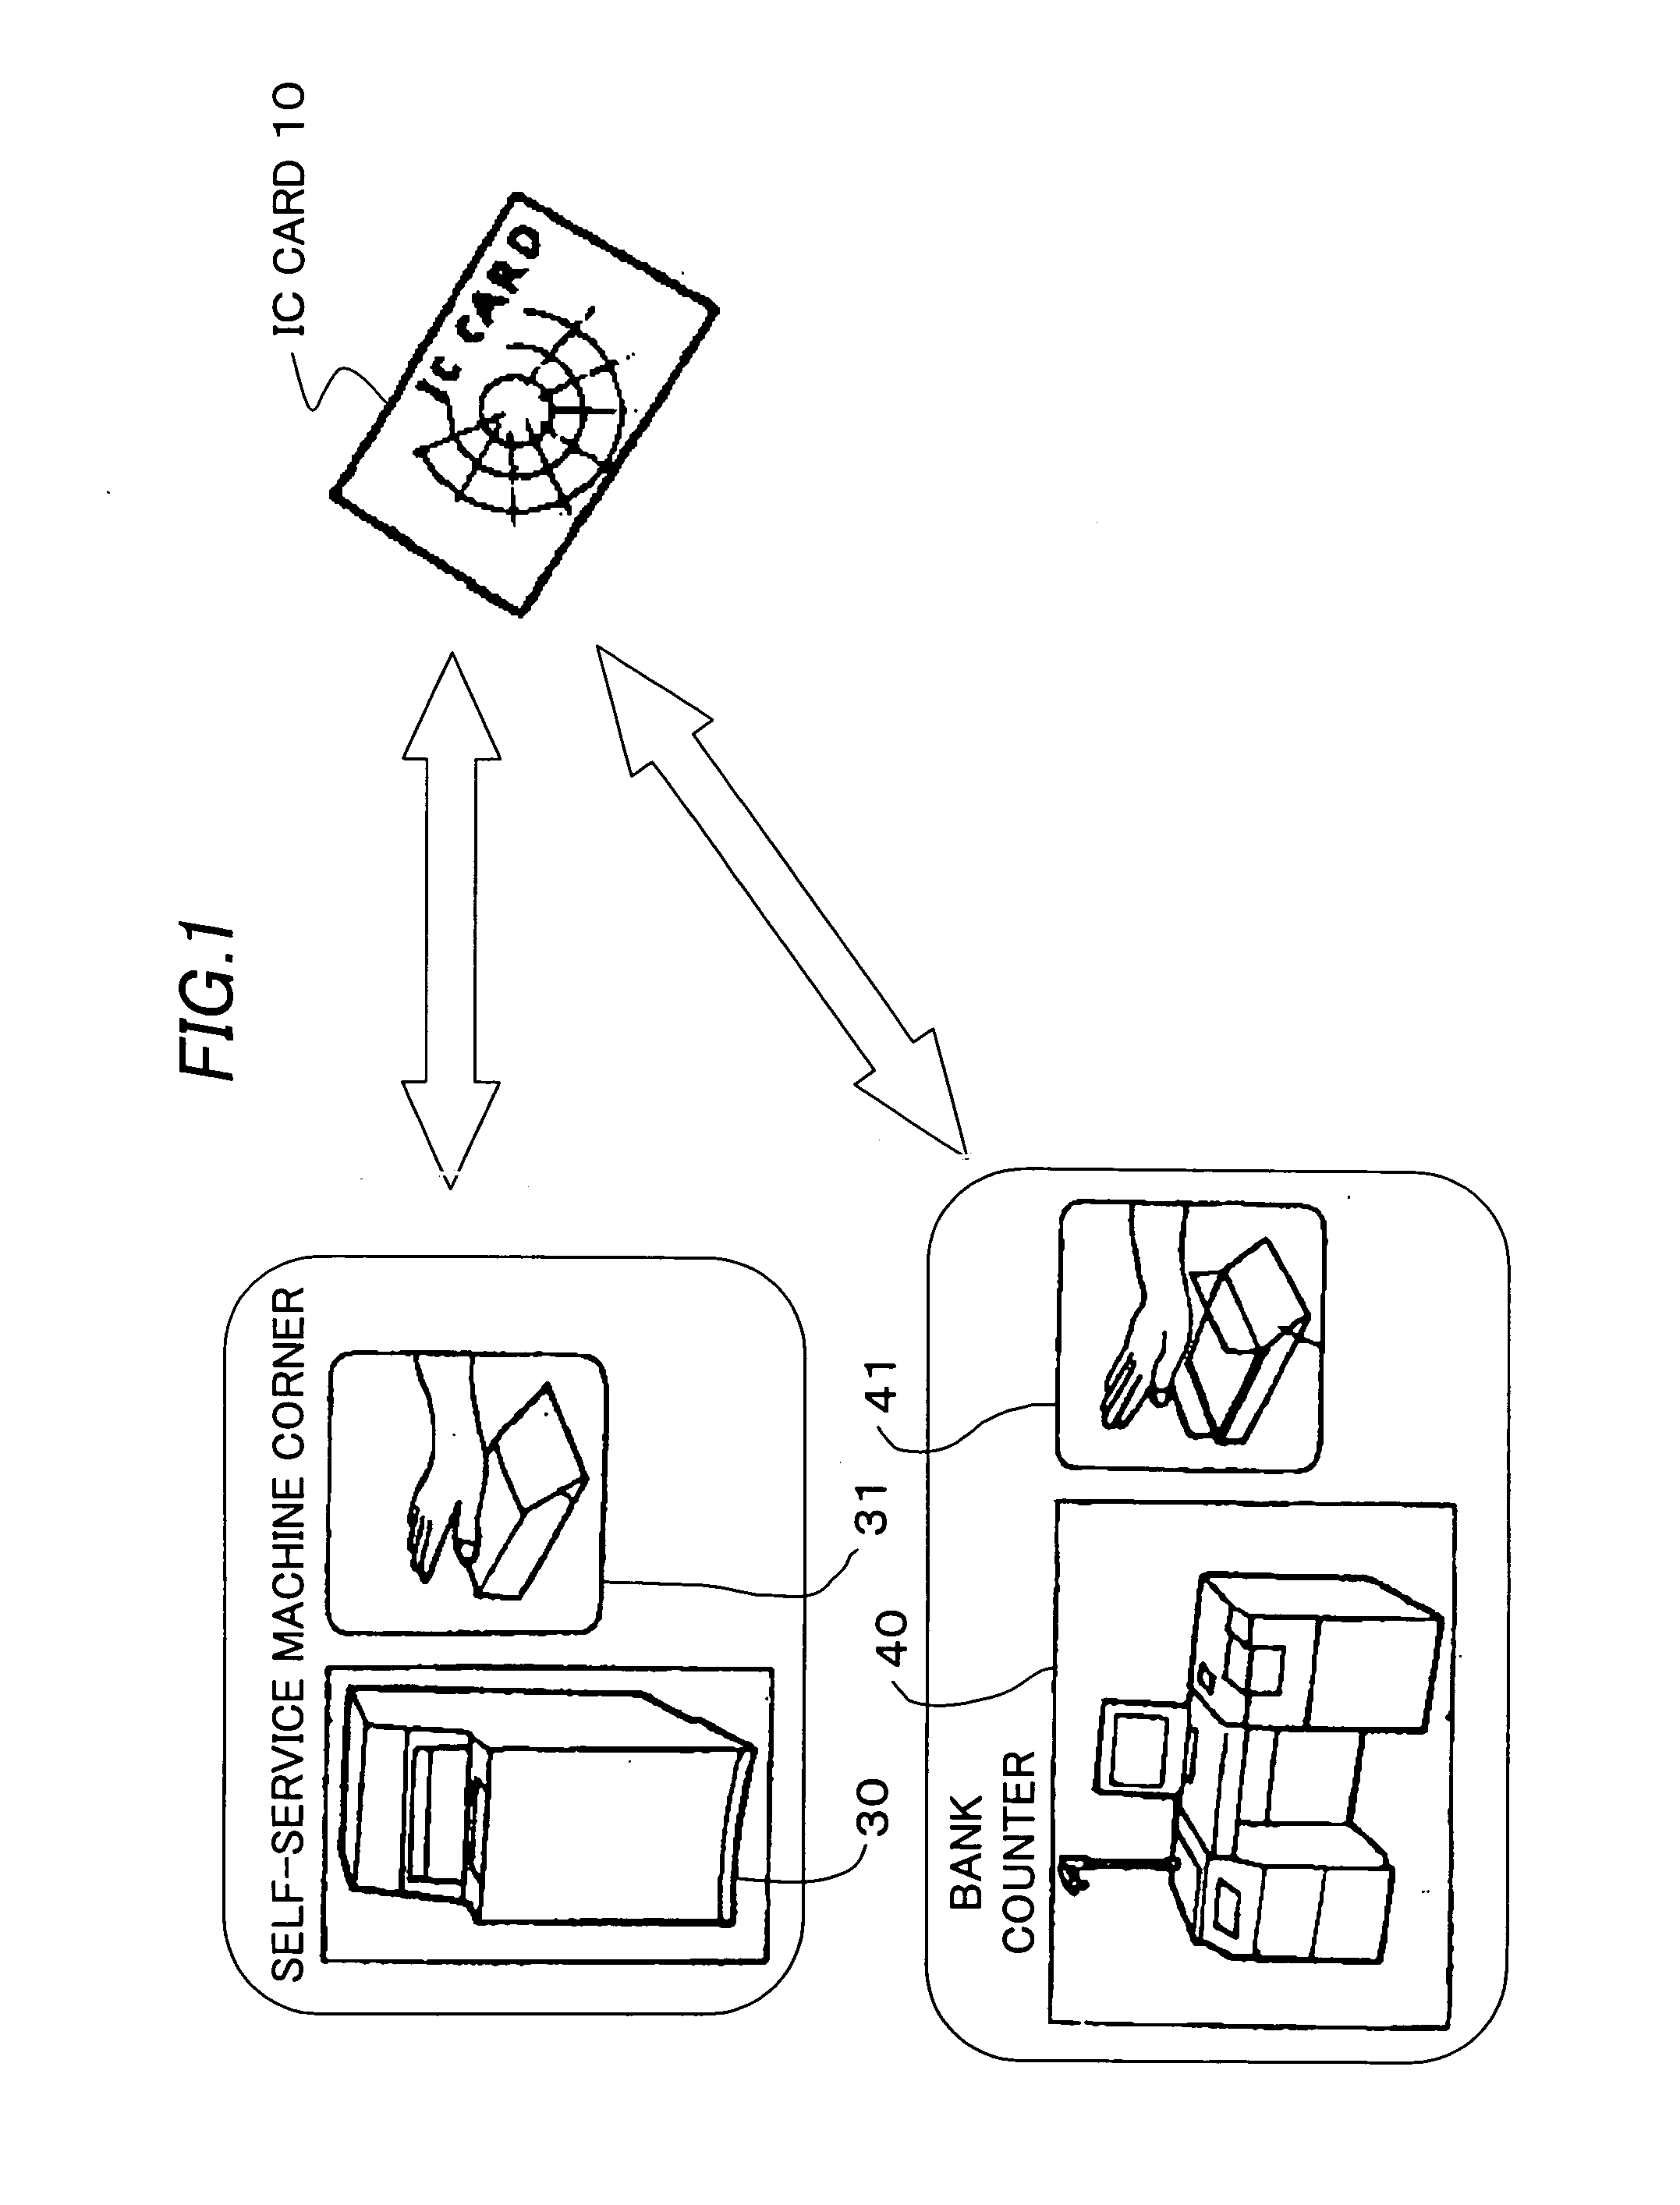 User authentication apparatus, electronic equipment, and a storage medium embodying a user authentication program